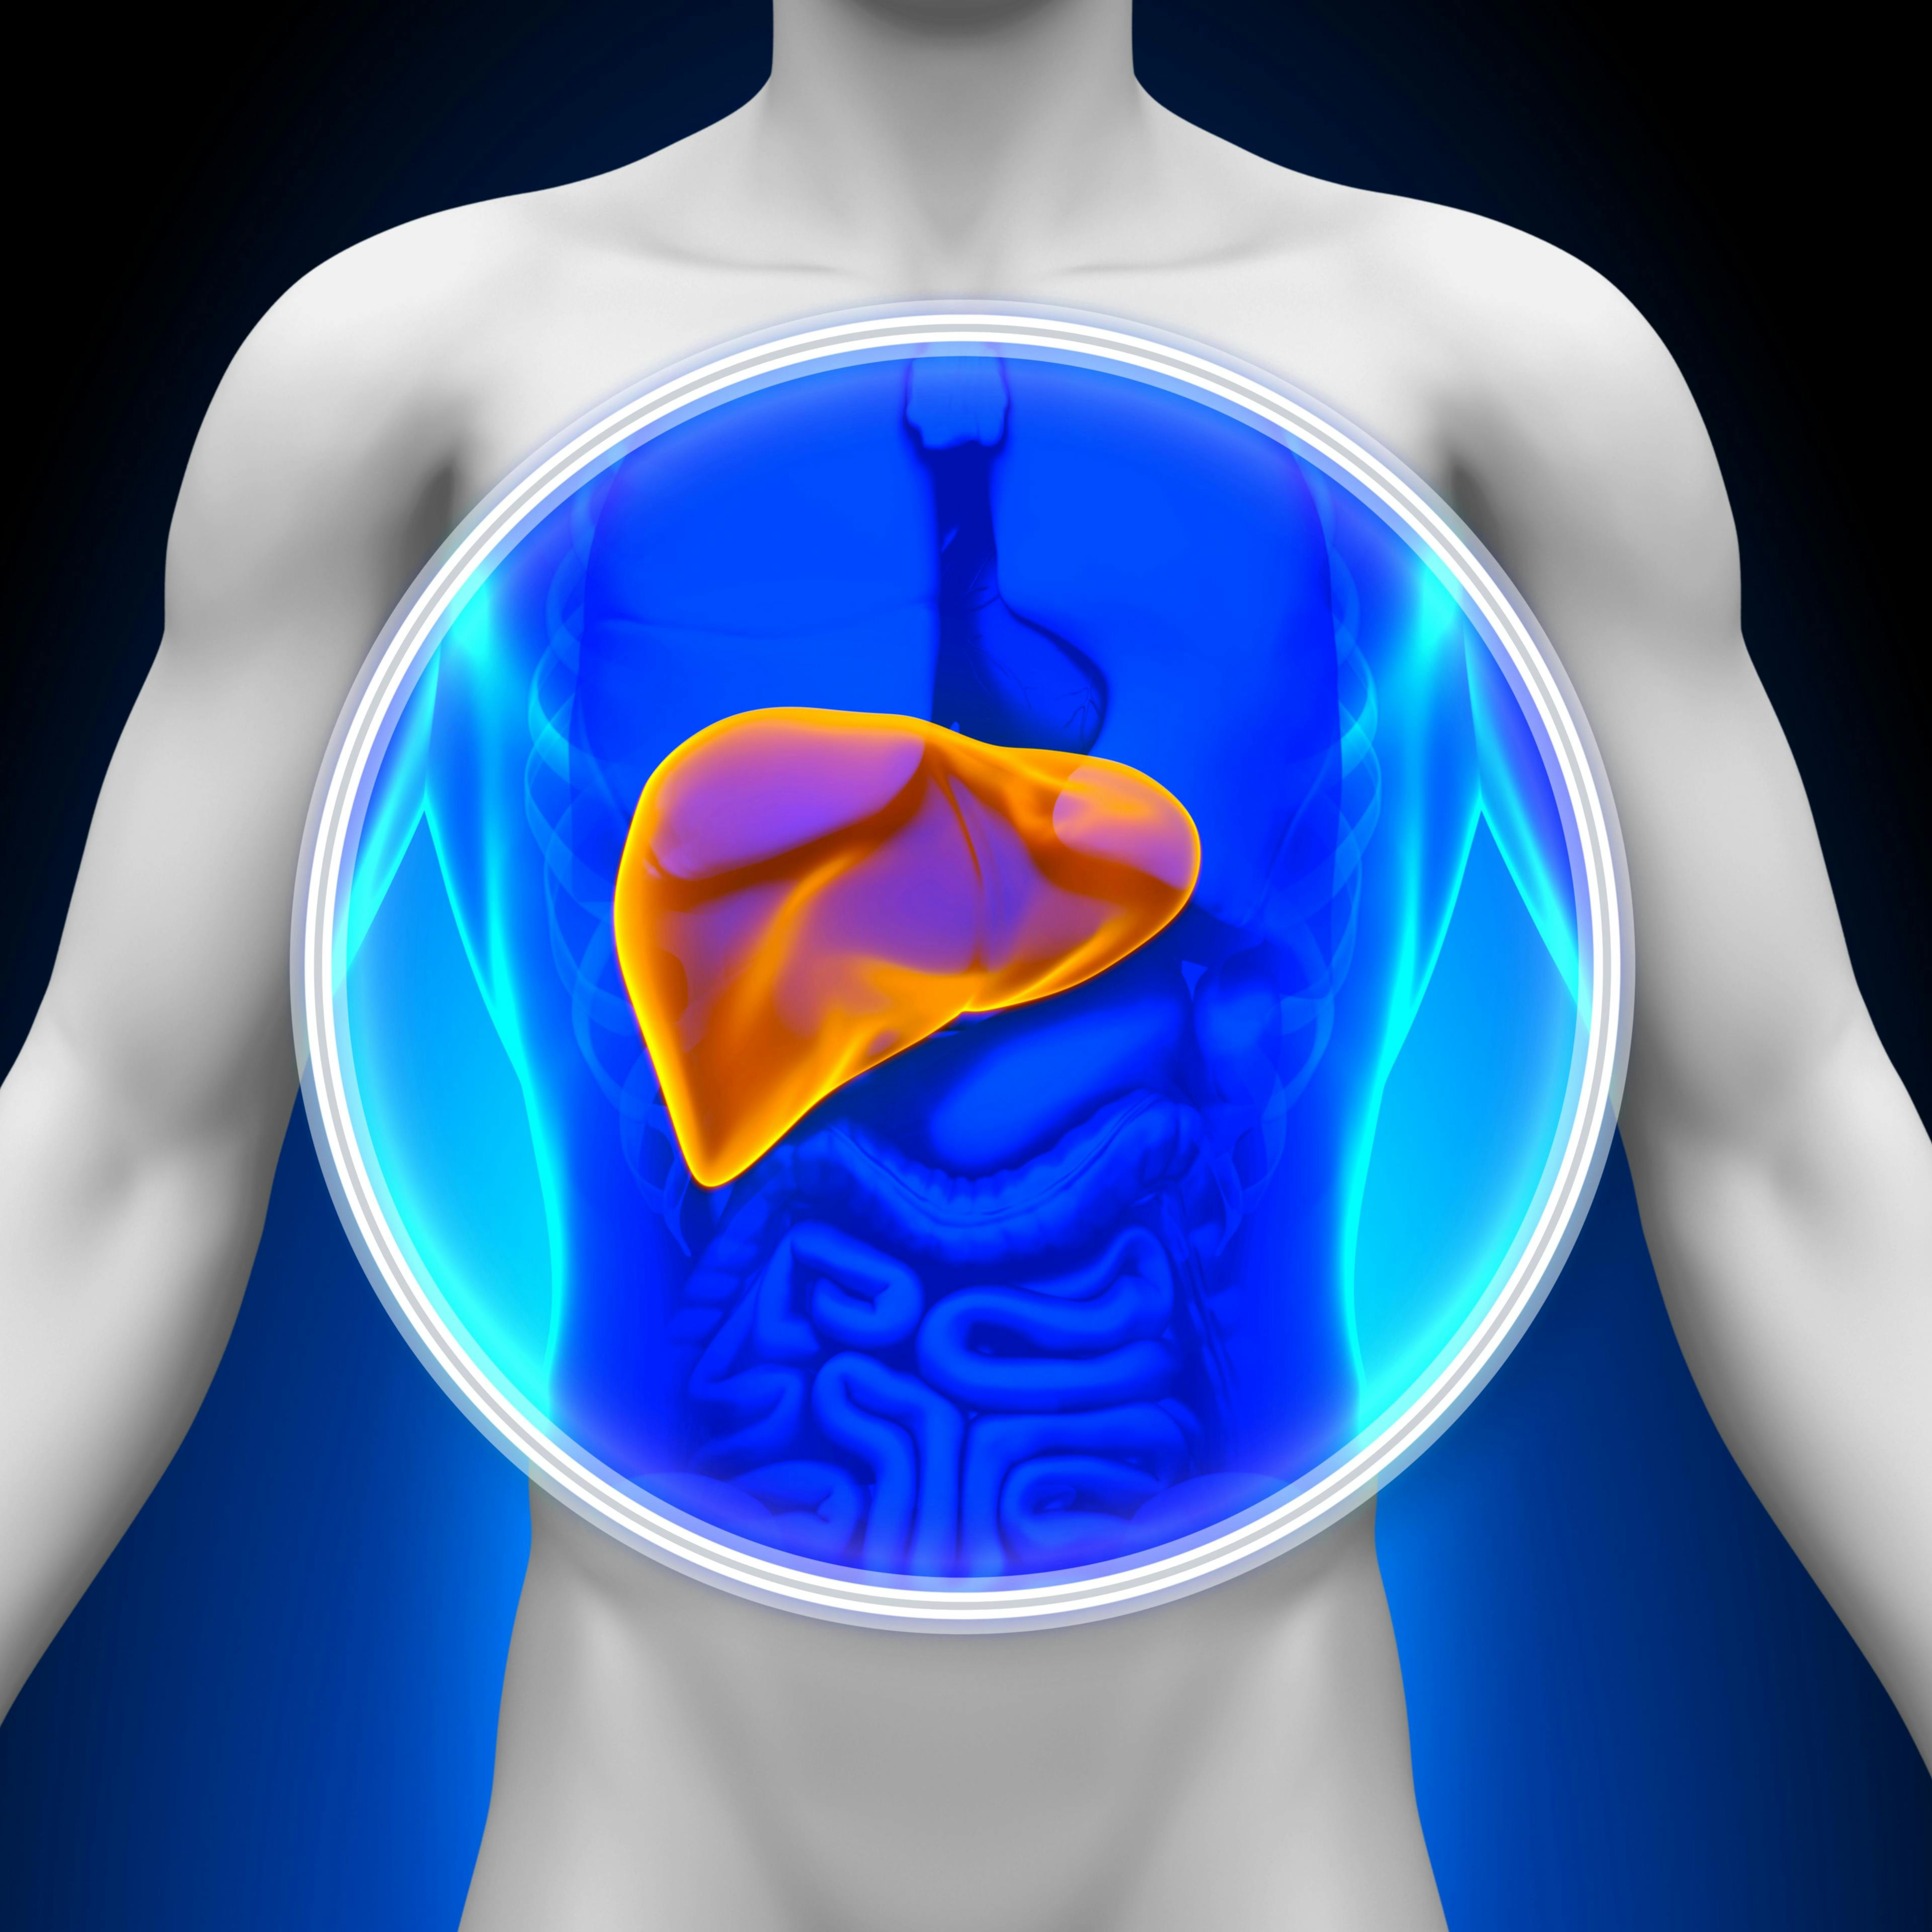 Tremelimumab plus durvalumab demonstrated encouraging safety and efficacy data compared with single agent durvalumab and tremelimumab in patients with unresectable hepatocellular carcinoma.